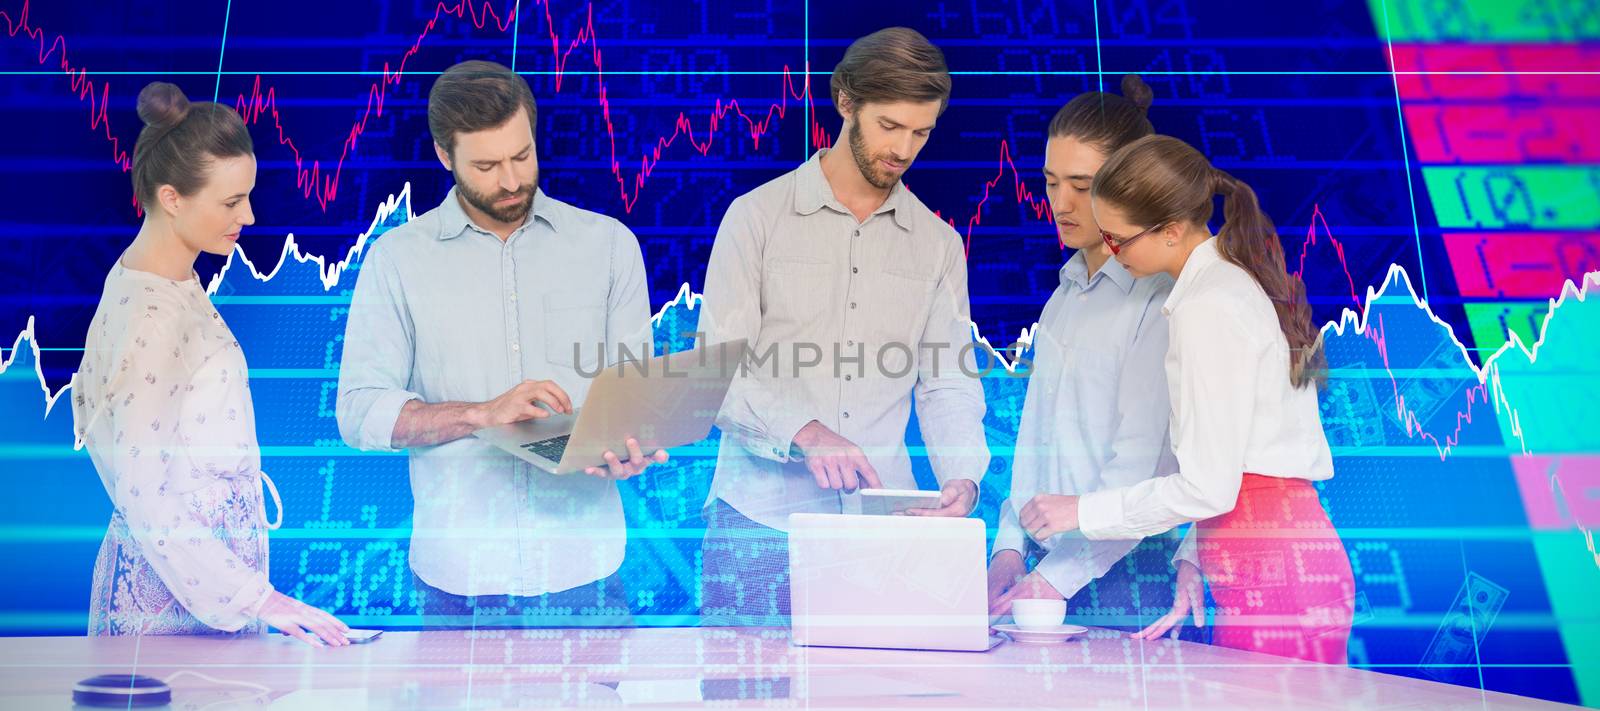 Composite image of business people interacting while standing at table by Wavebreakmedia